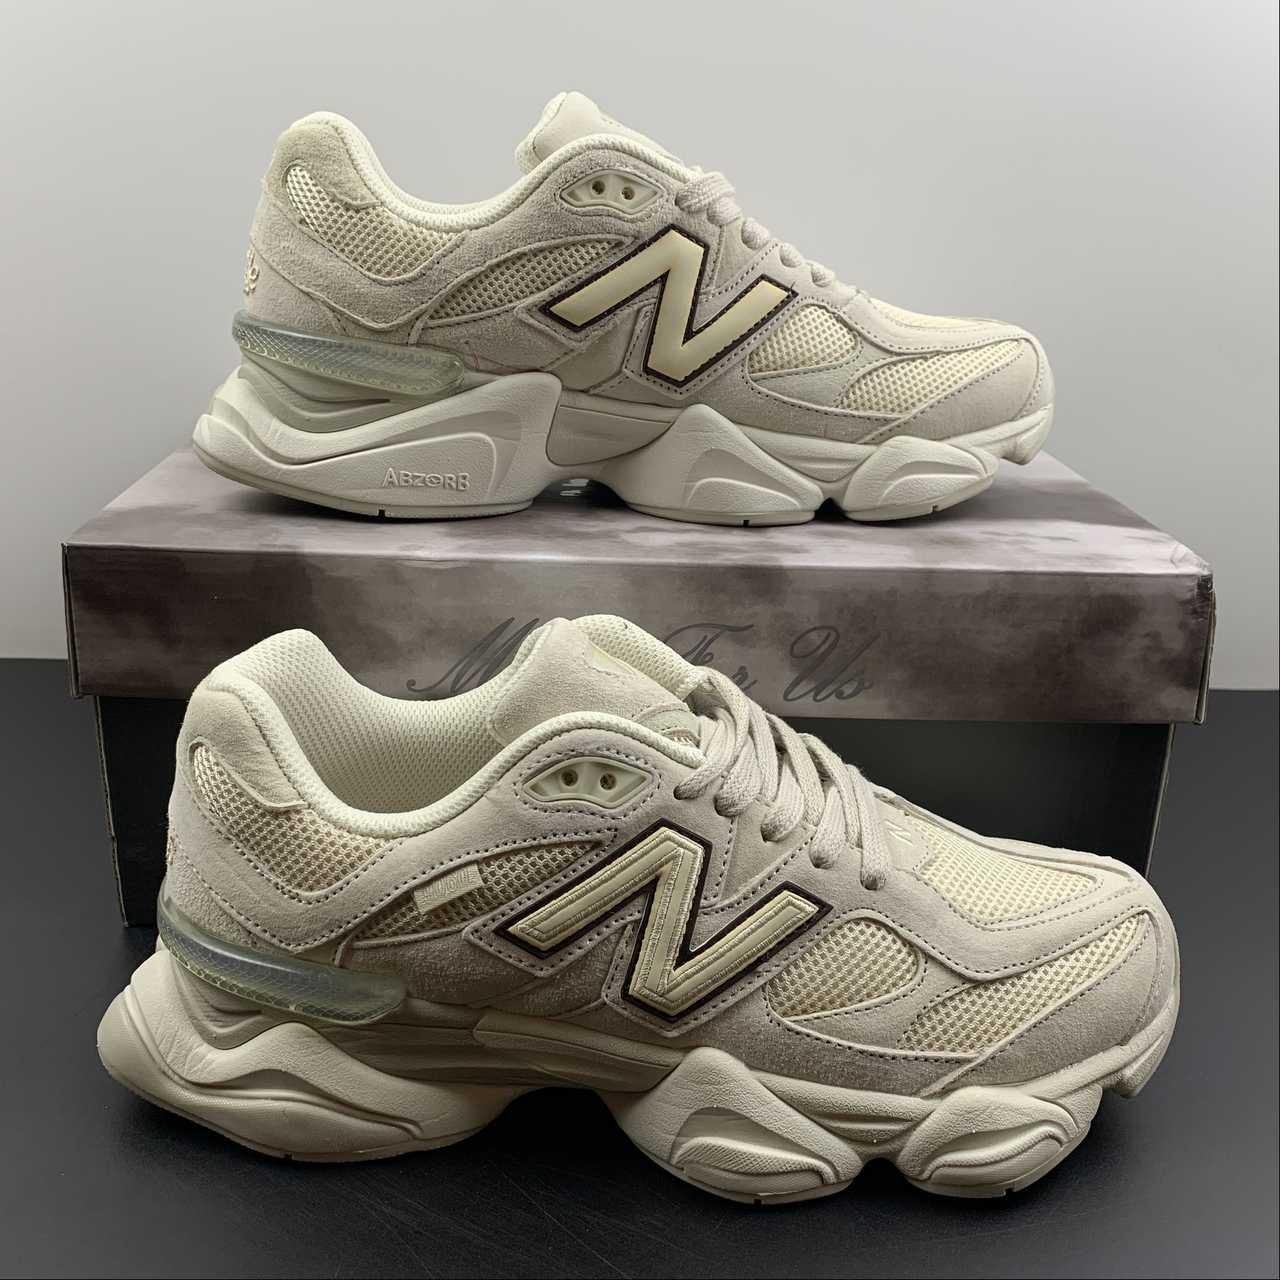 2022 NB sport shoes NB9060 Breathable running shoes U9060ND1 (China ...